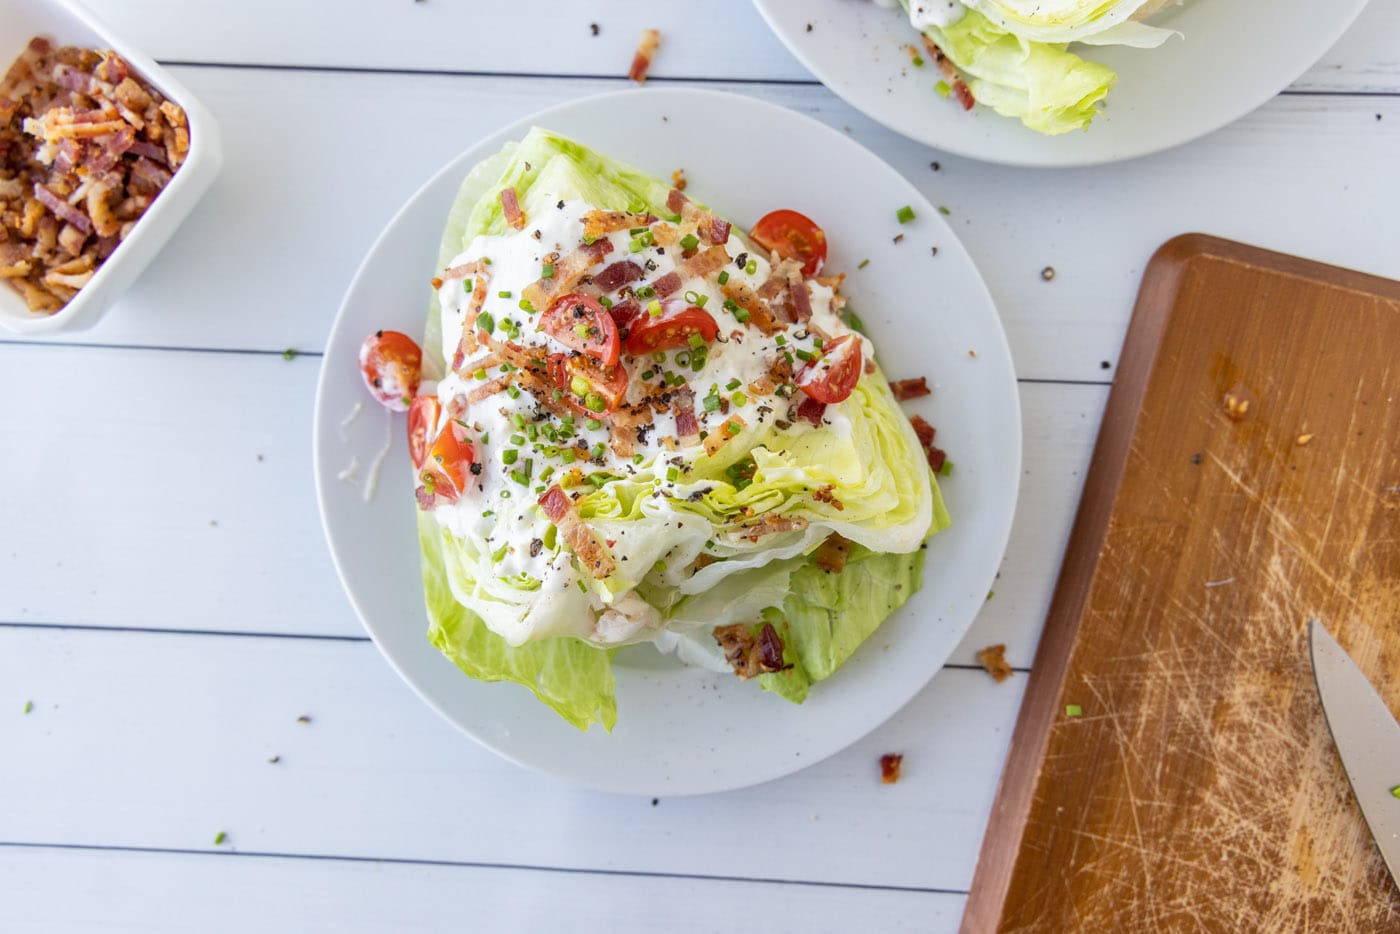 chives and bleu cheese crumbles added to bacon and bleu cheese wedge salad